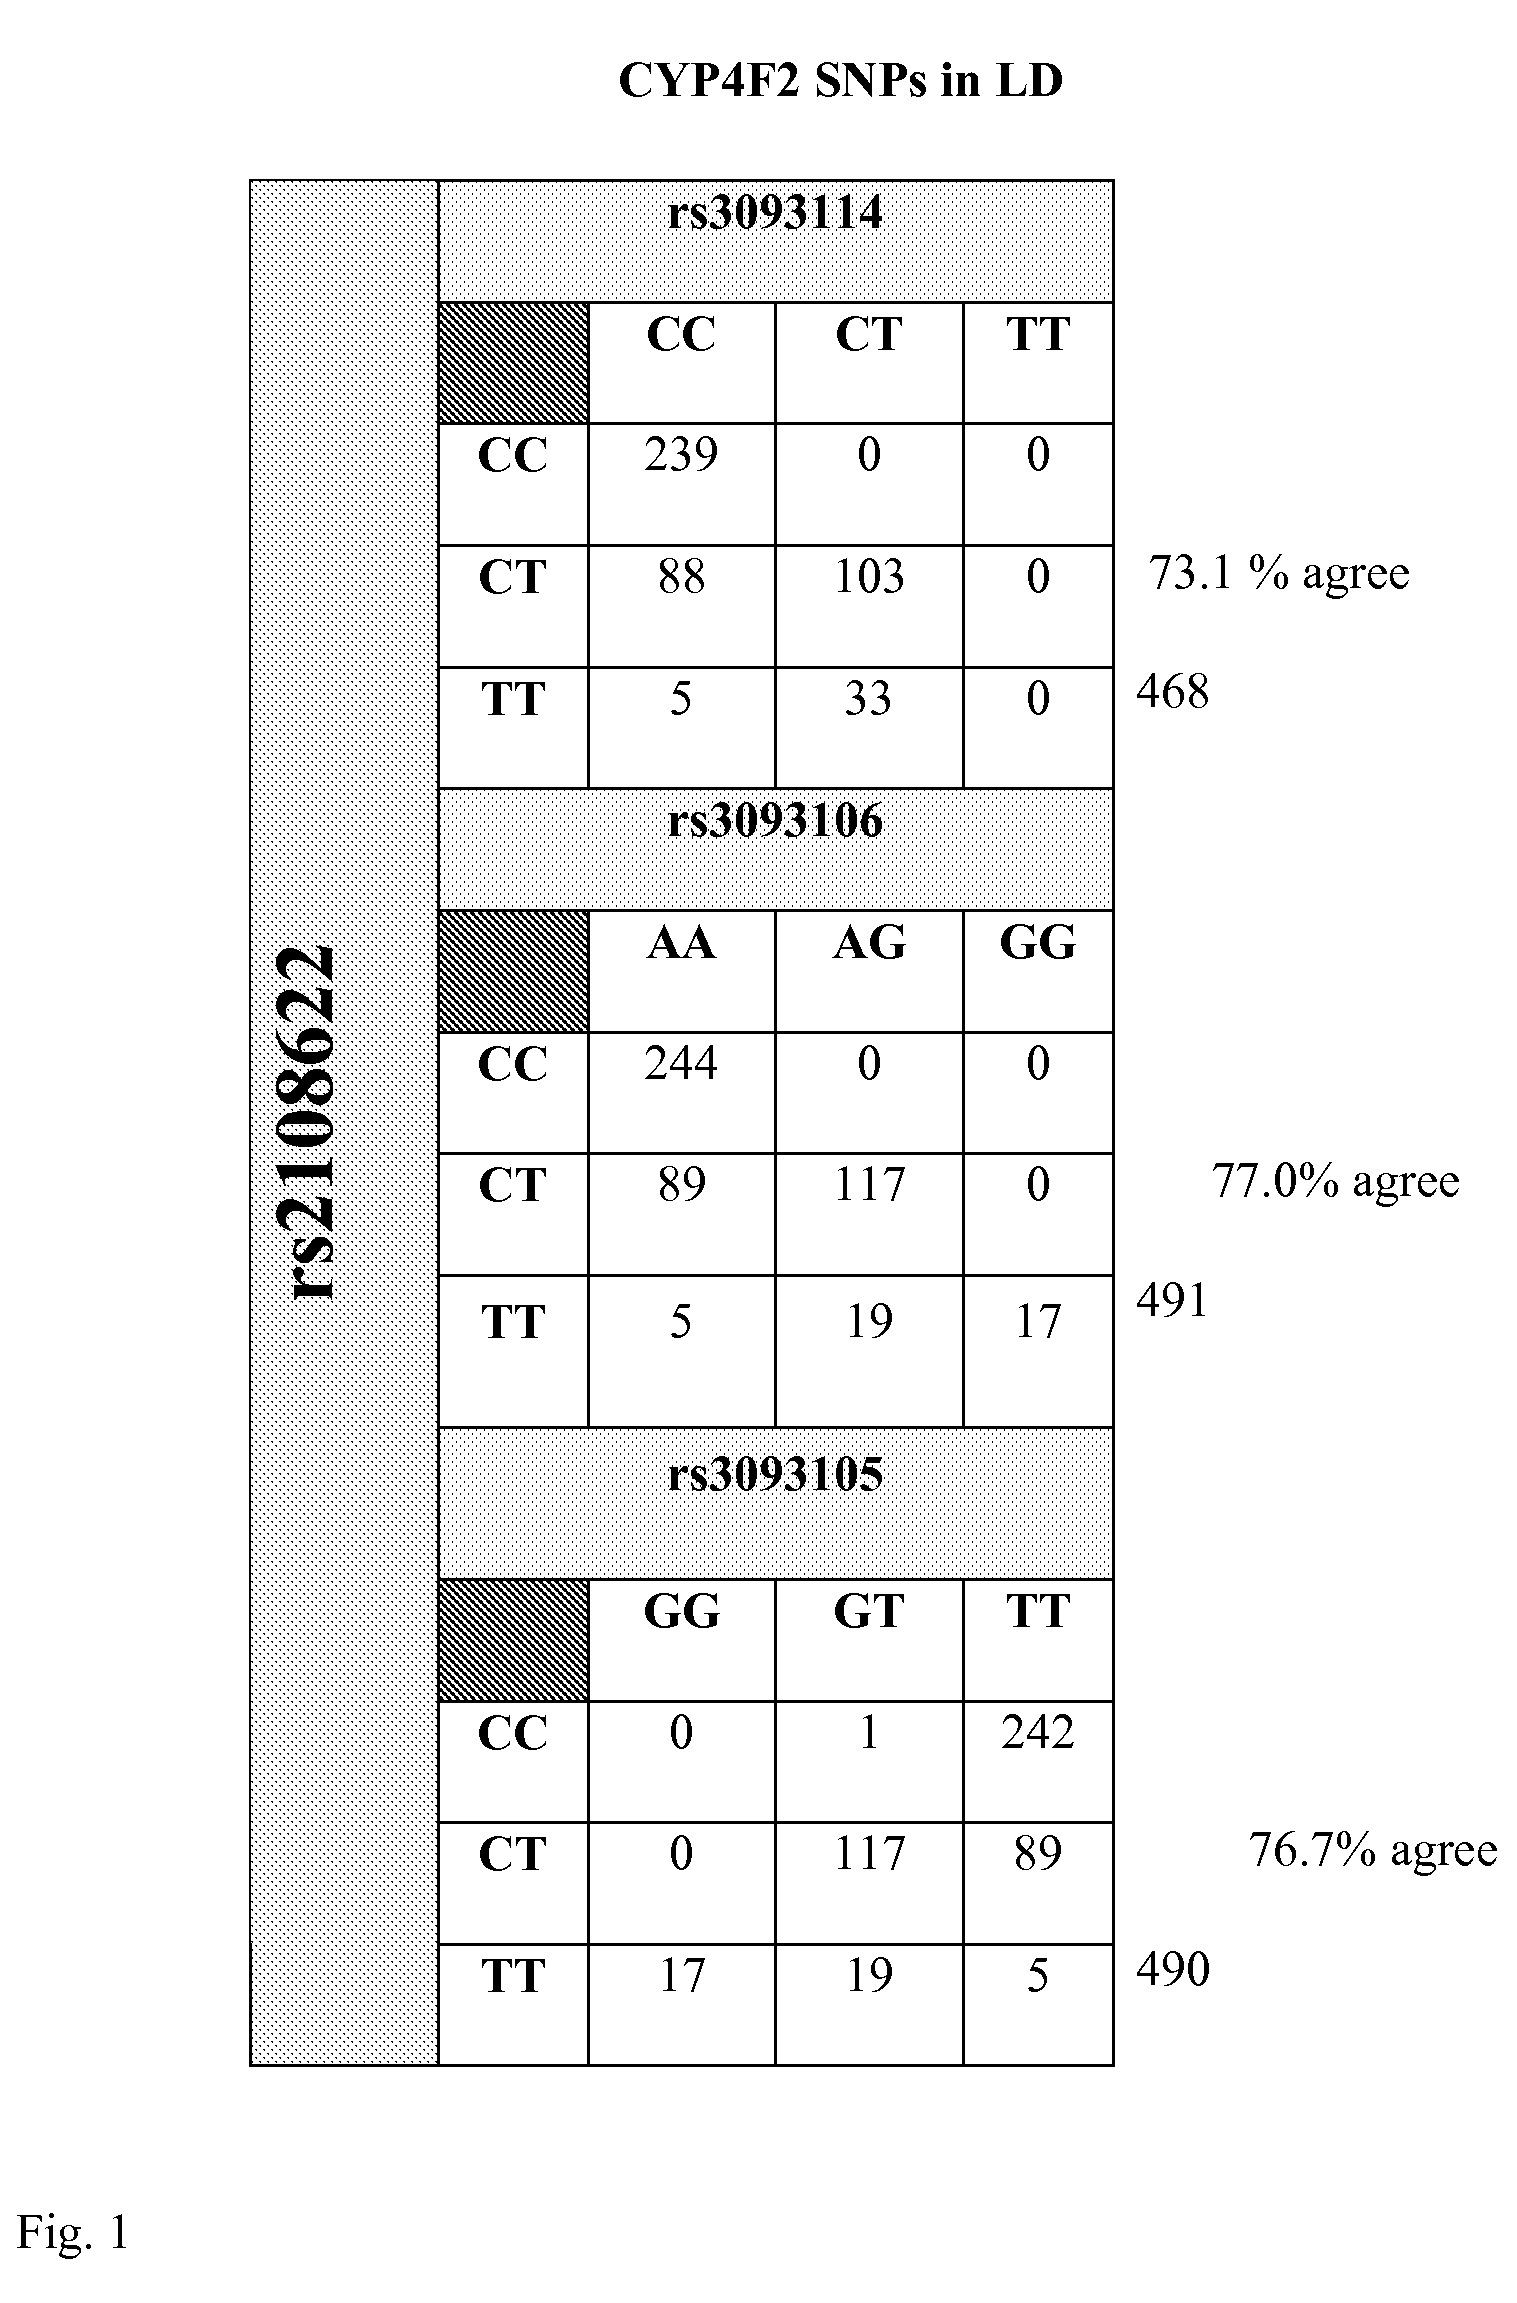 Method for administering anticoagulation therapy